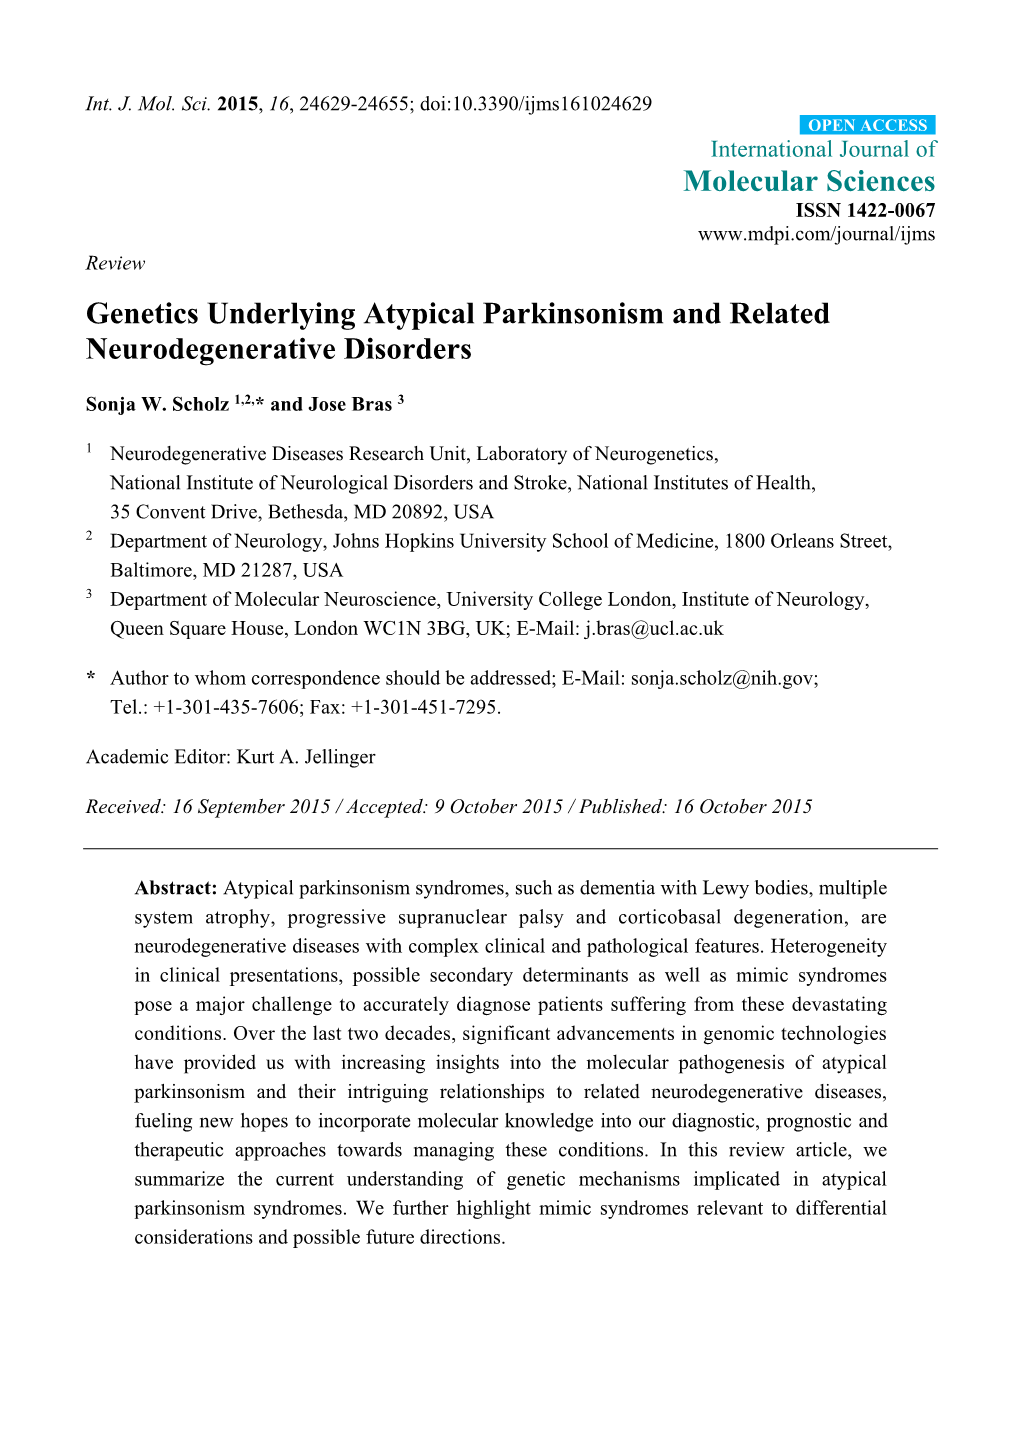 Genetics Underlying Atypical Parkinsonism and Related Neurodegenerative Disorders